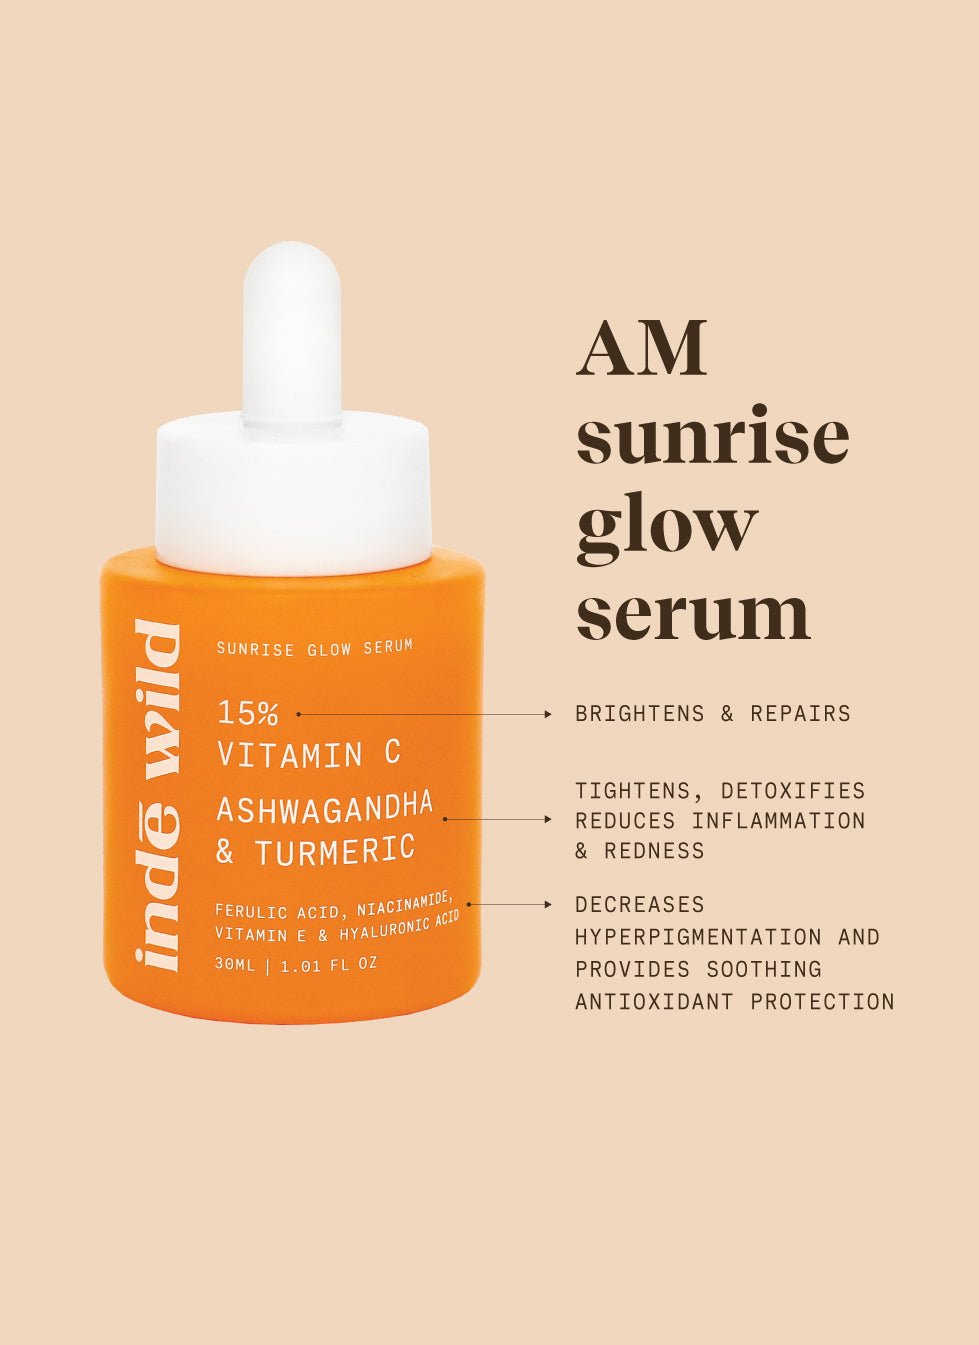 Presenting our morning power duo - AM Sunrise Glow Serum & AM Sunscreen Glow Drops - indē wild US